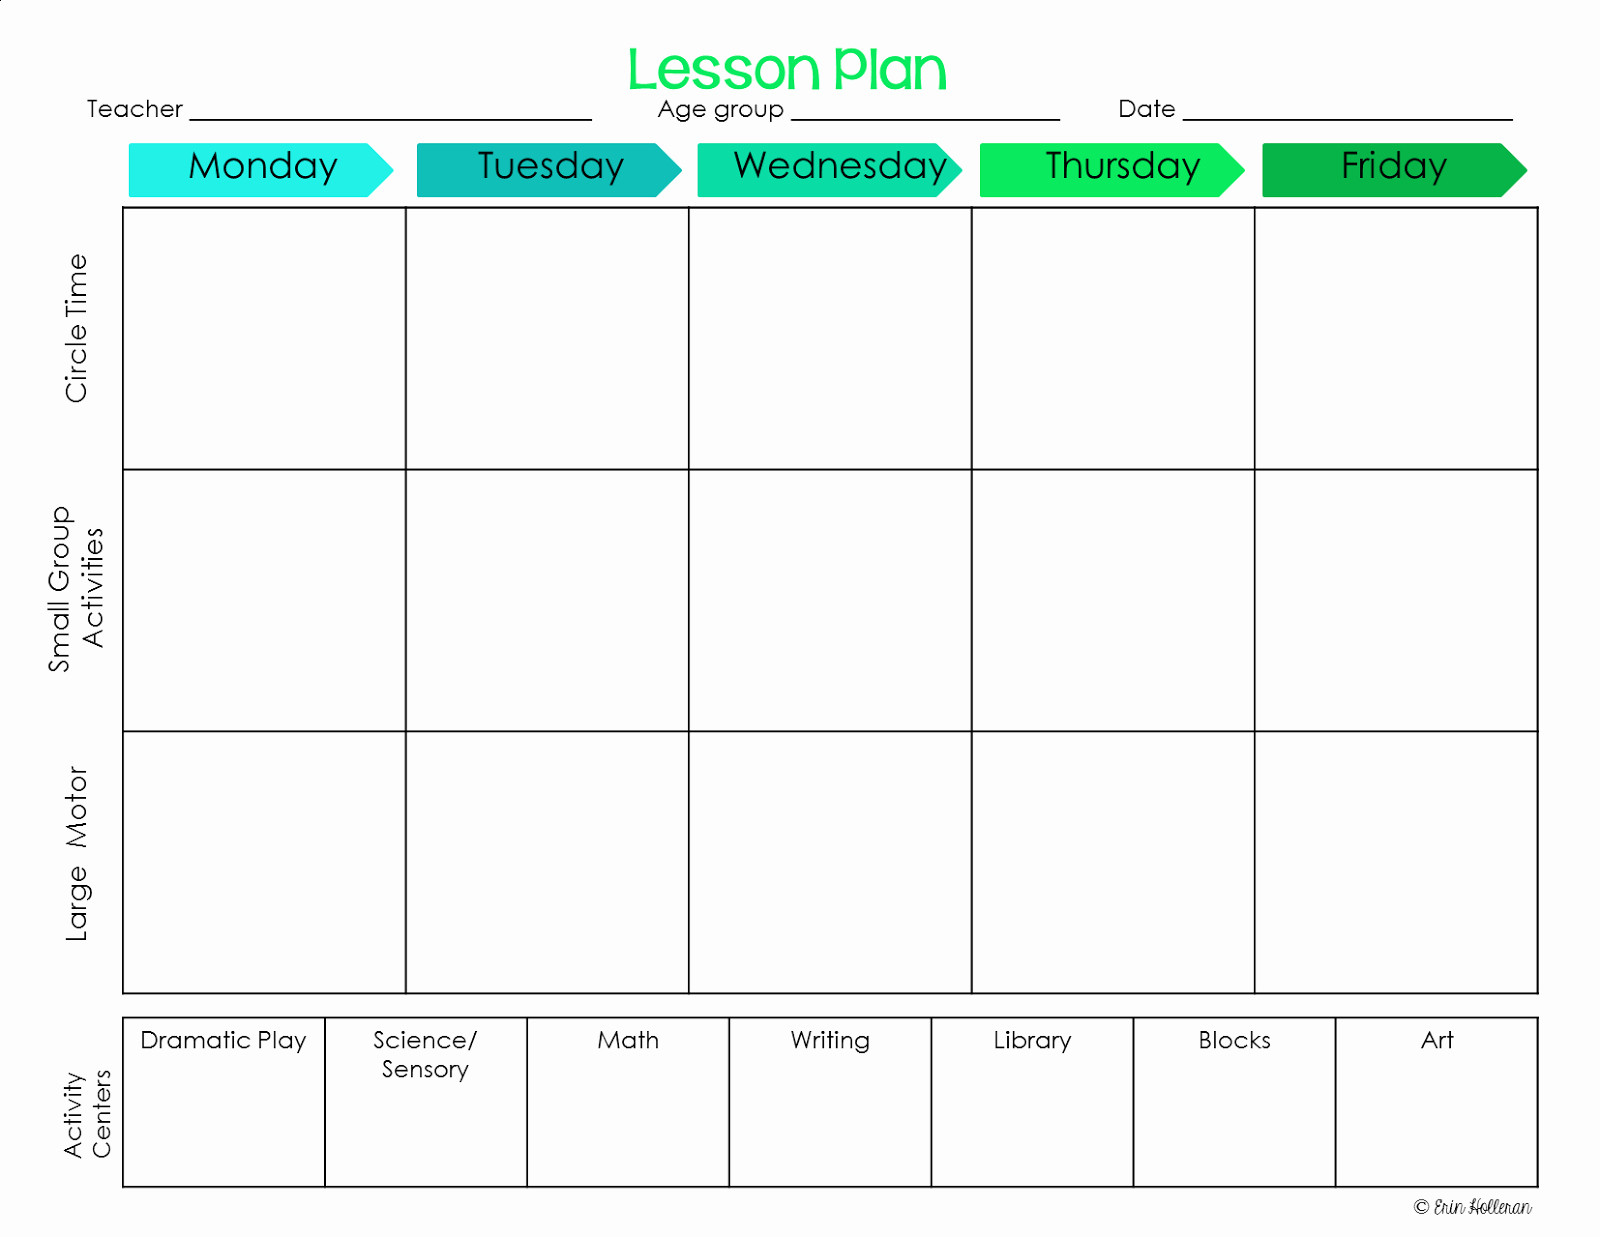 Weekly Lesson Plan 005 Preschool Weekly Lesson Plan Template Free Ideas with